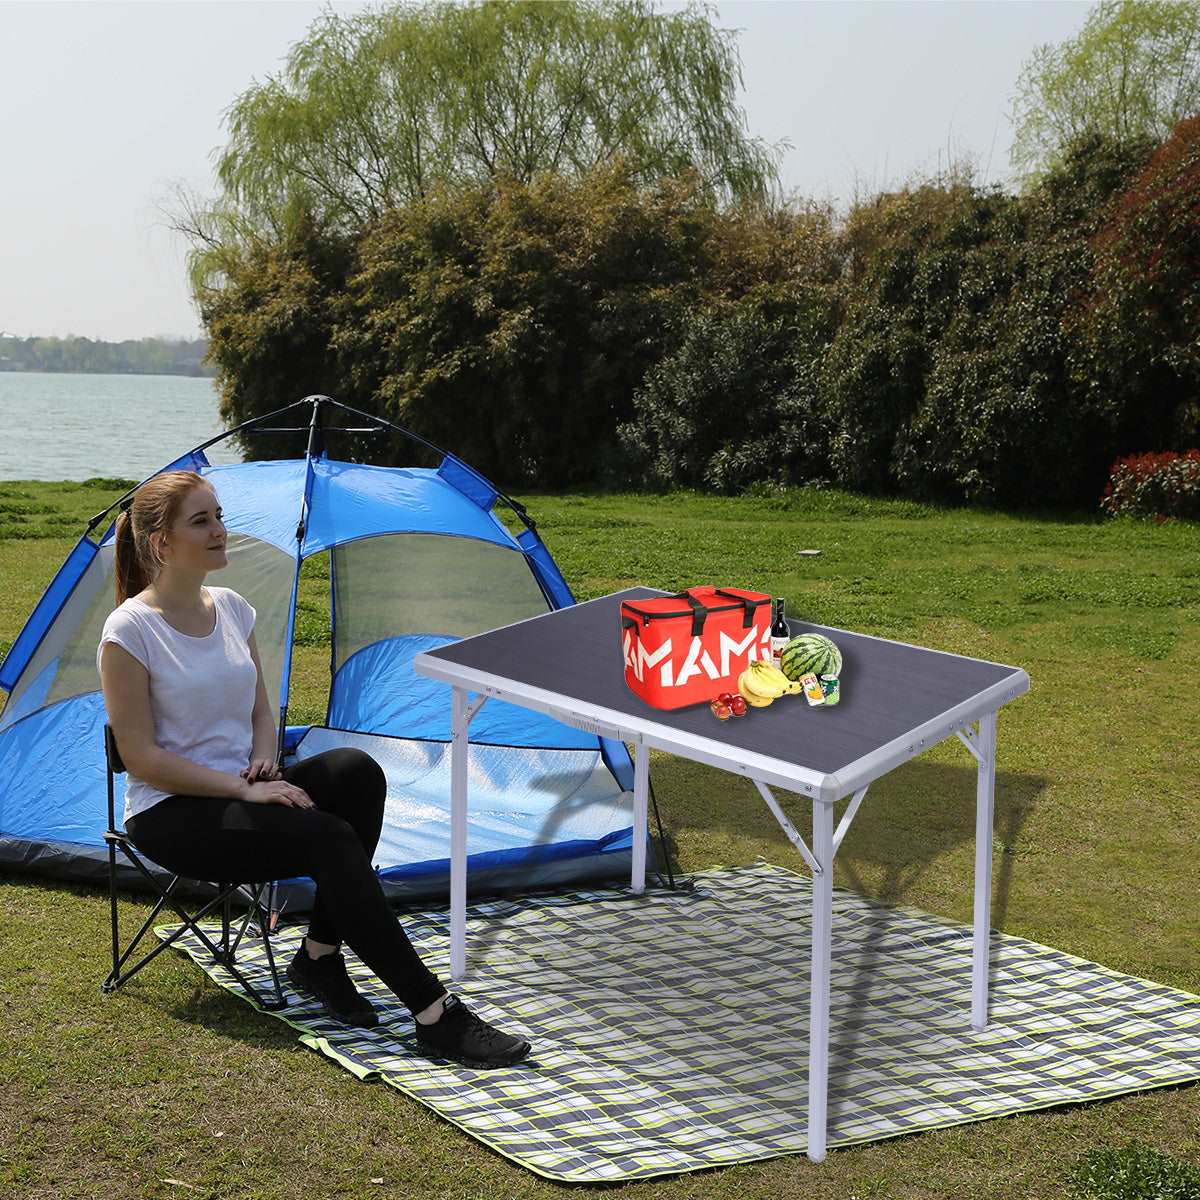 Aluminum Folding Camping Table with Collapsible Legs